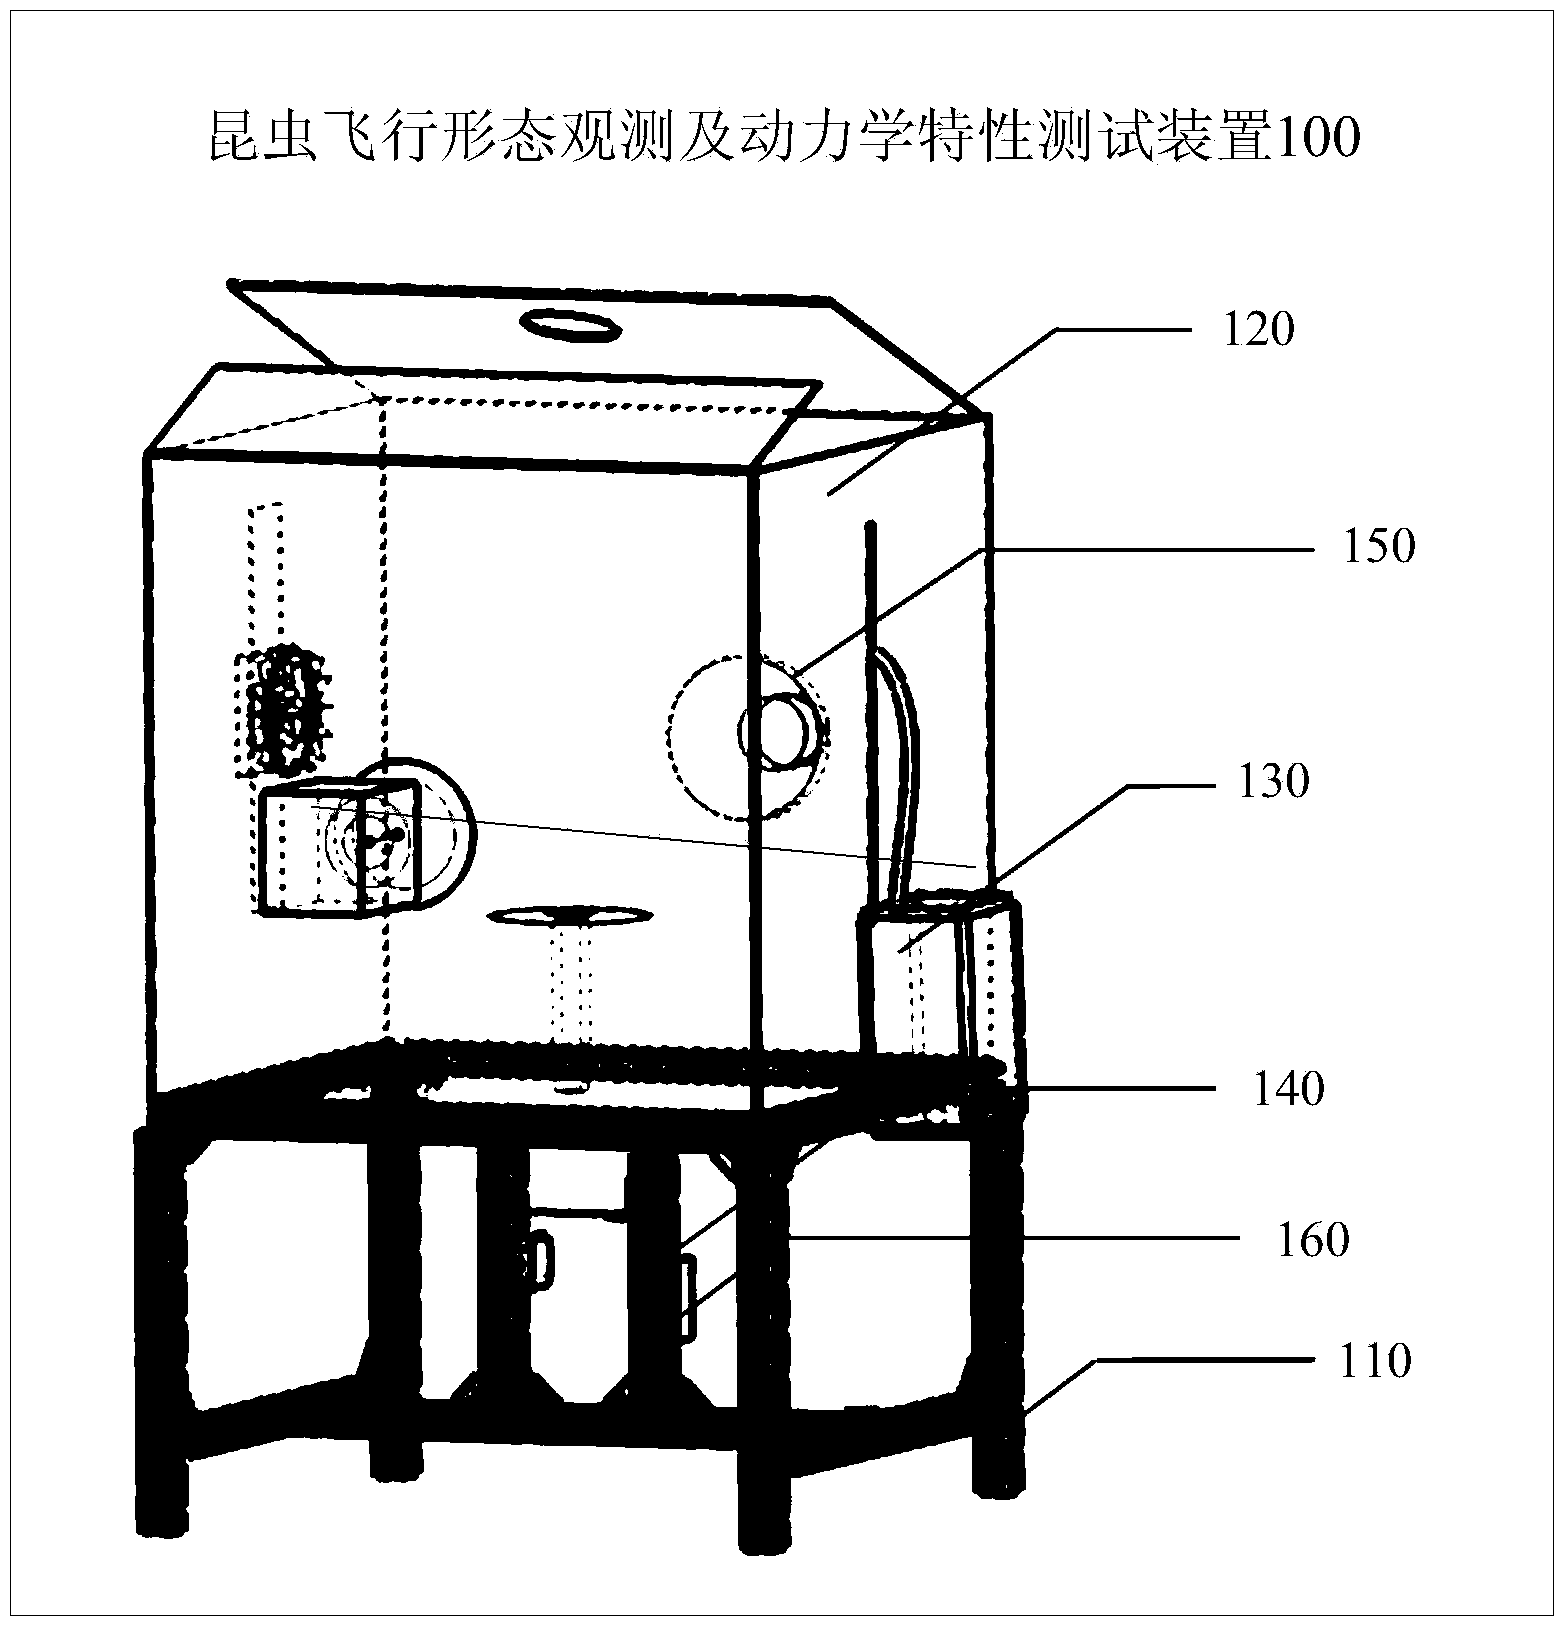 Insect flying form observing and dynamic characteristic testing device